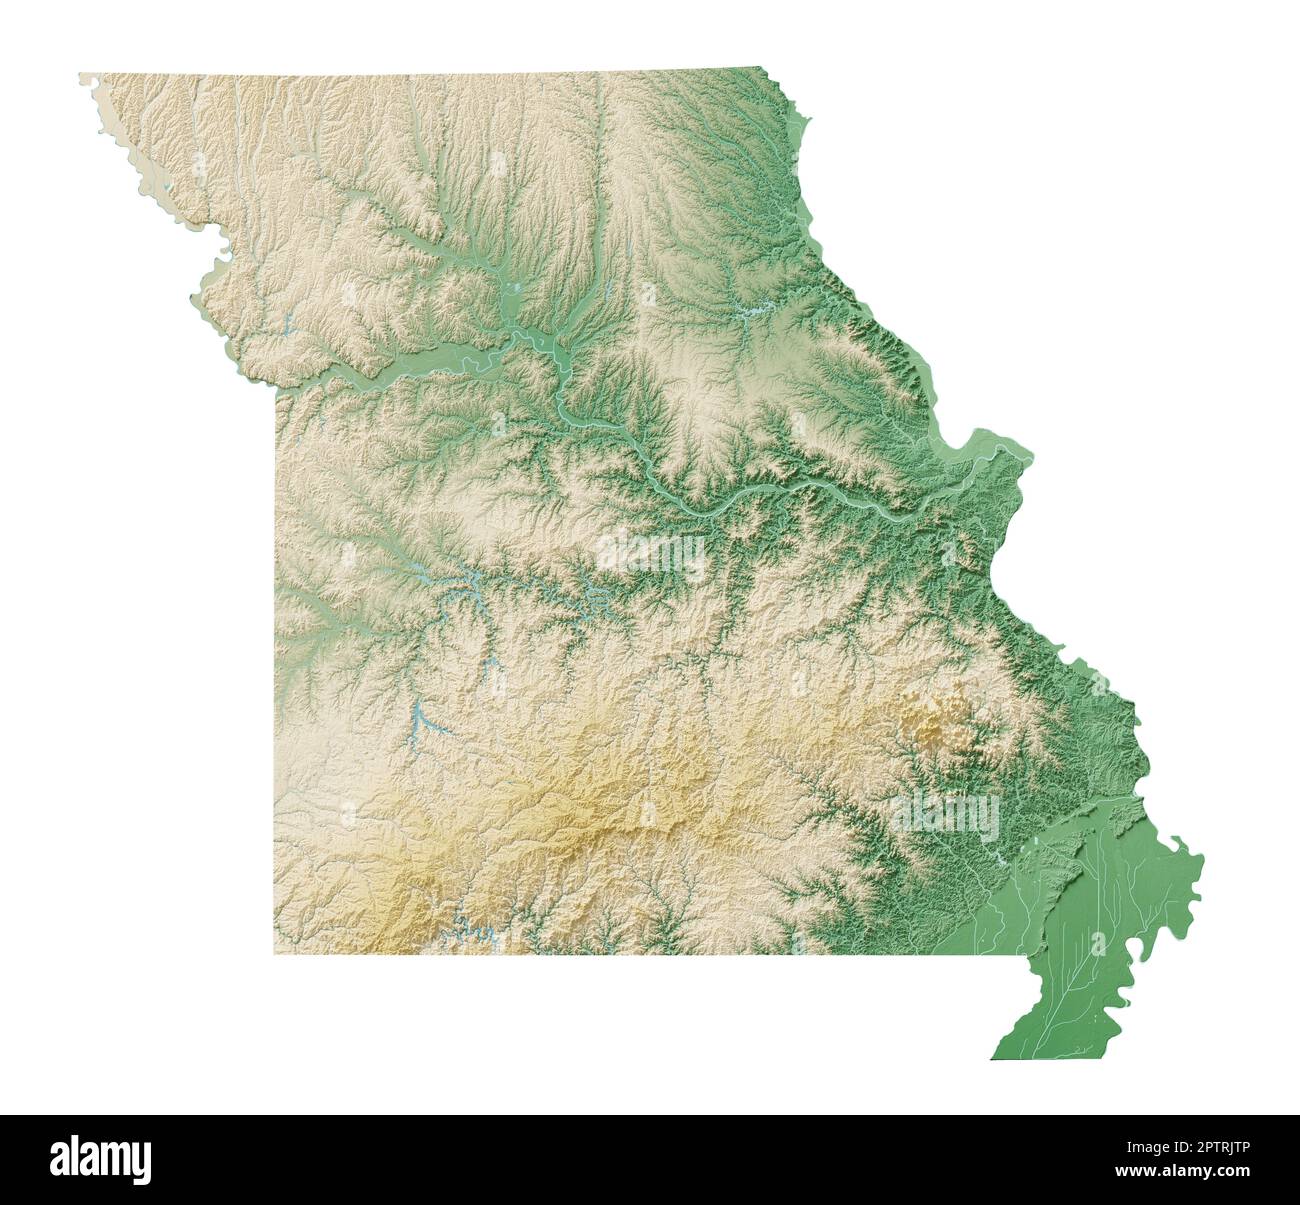 The US state of Missouri. A highly detailed 3D rendering of a shaded relief map with water bodies. Colored by elevation. Created with satellite data. Stock Photo